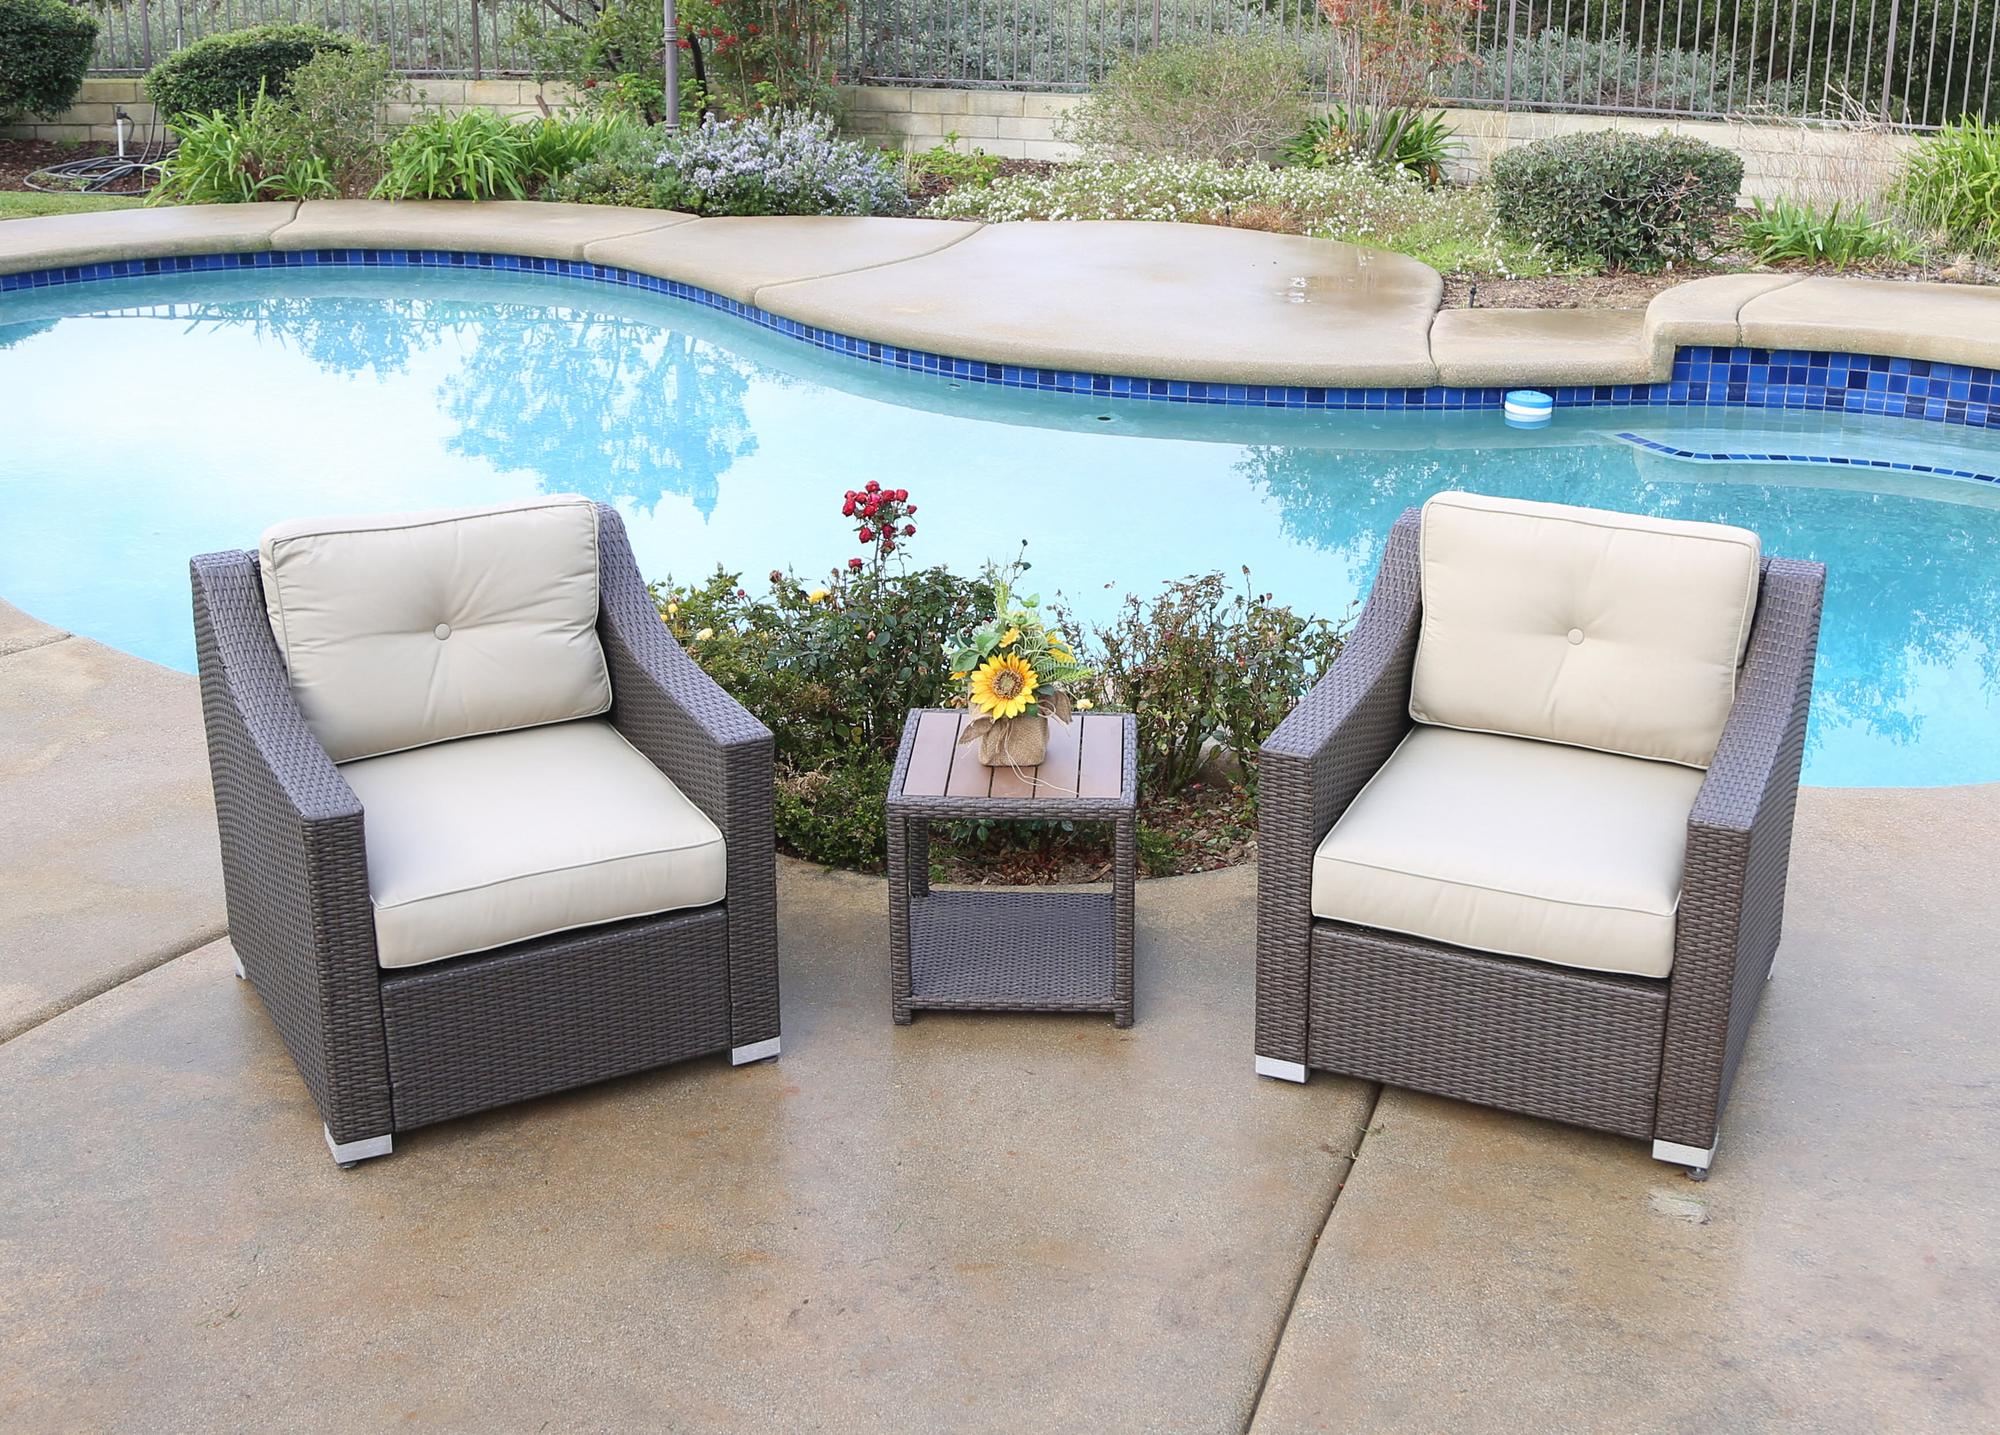 2 Piece South Beach Wicker Patio Conversation Deep Seating Group With Cushion